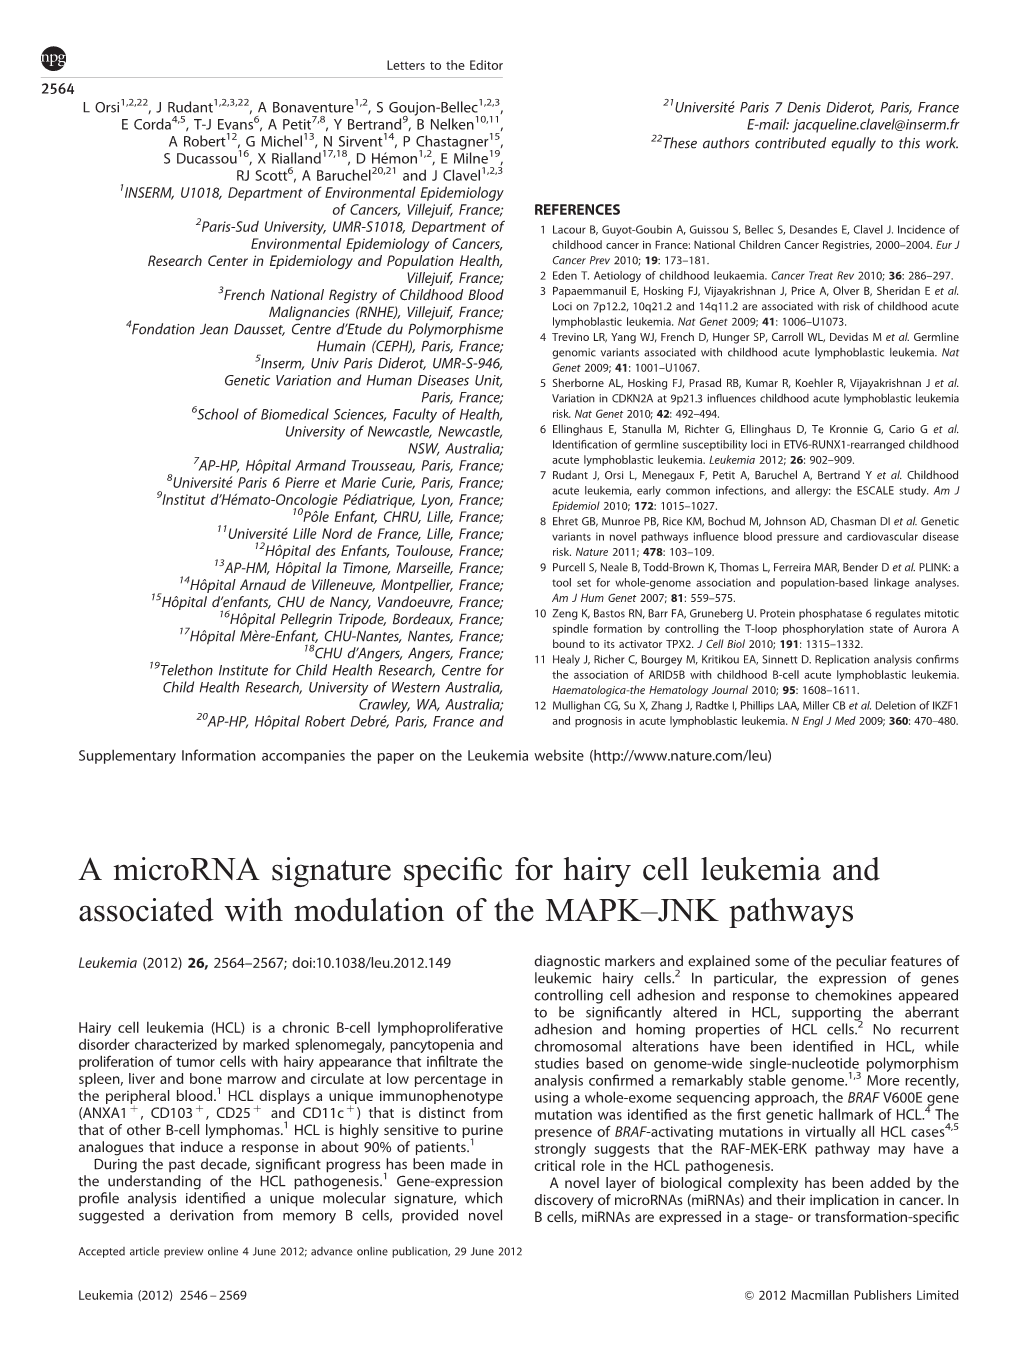 A Microrna Signature Specific for Hairy Cell Leukemia and Associated with Modulation of the MAPK&Ndash;JNK Pathways